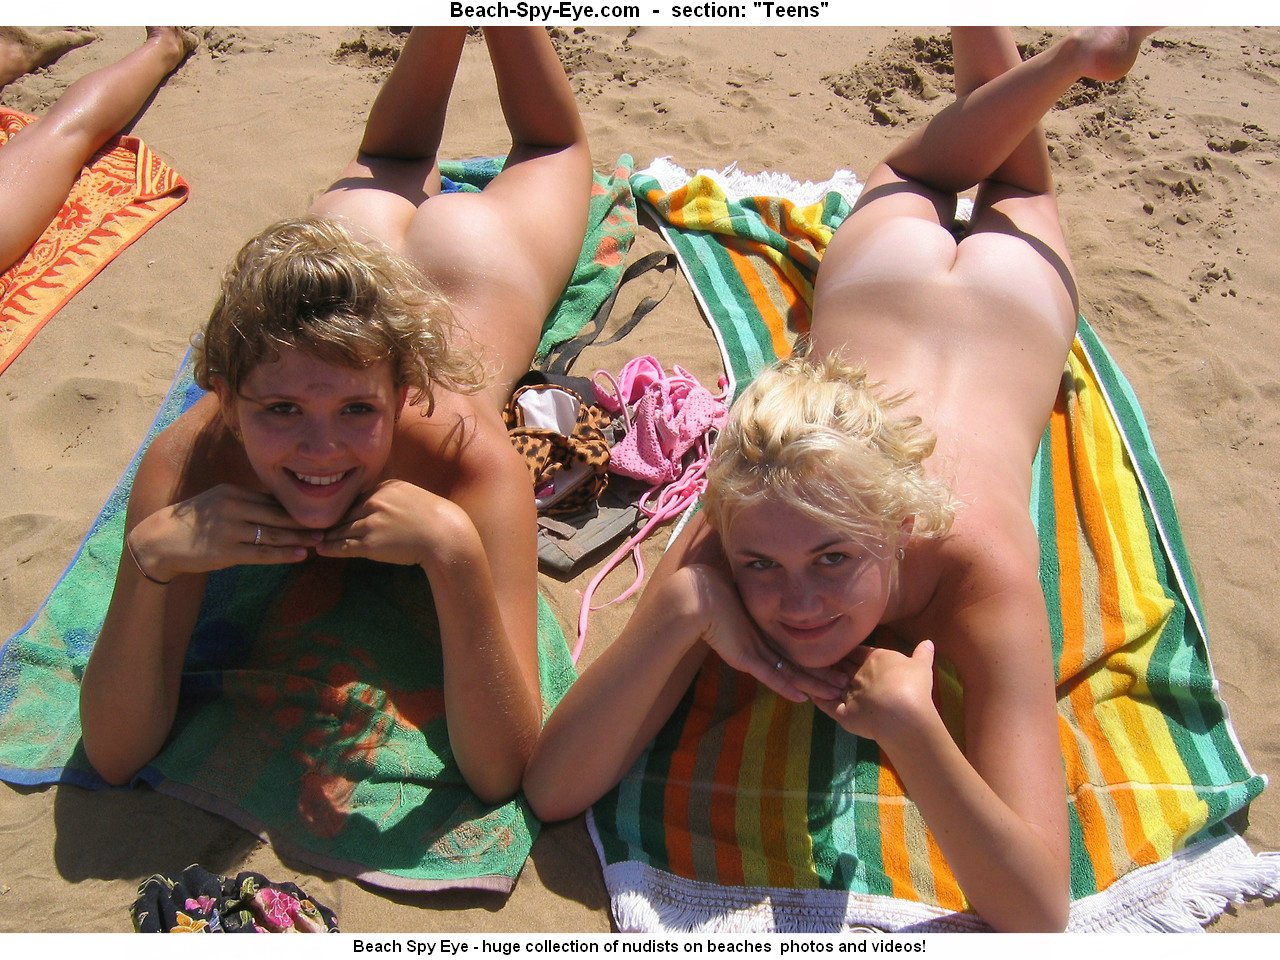 Nude Beaches Pics inviting damsels teases forebears Public on.. View 6